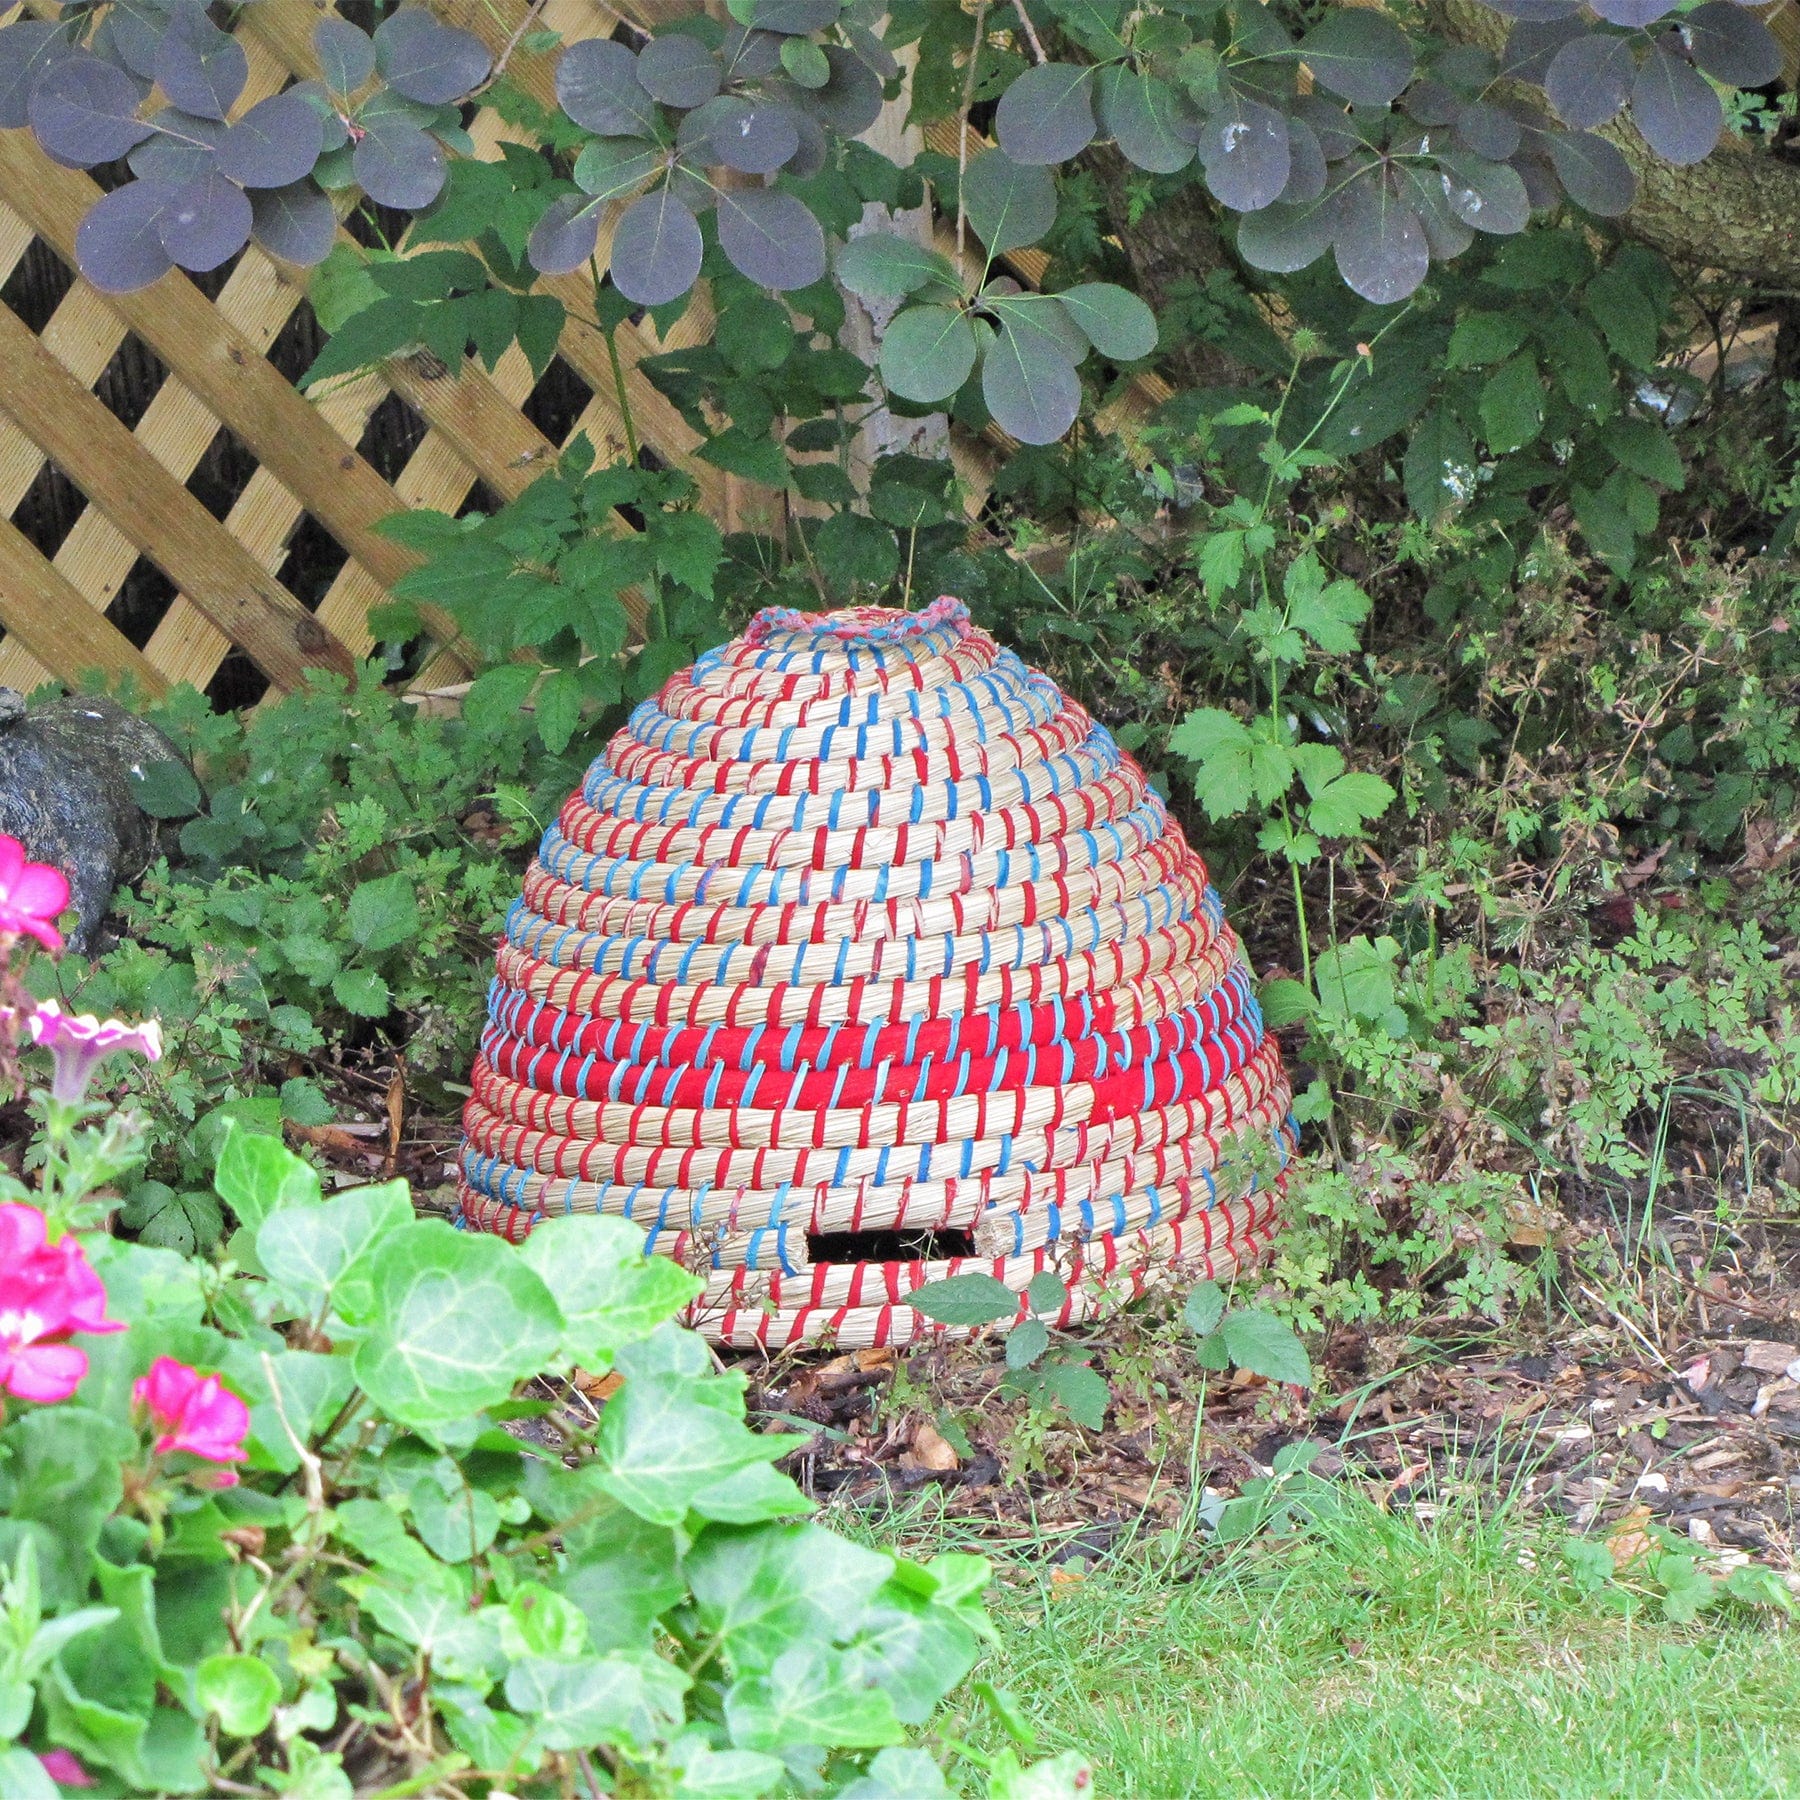 Decorative bee skep with recycled sari